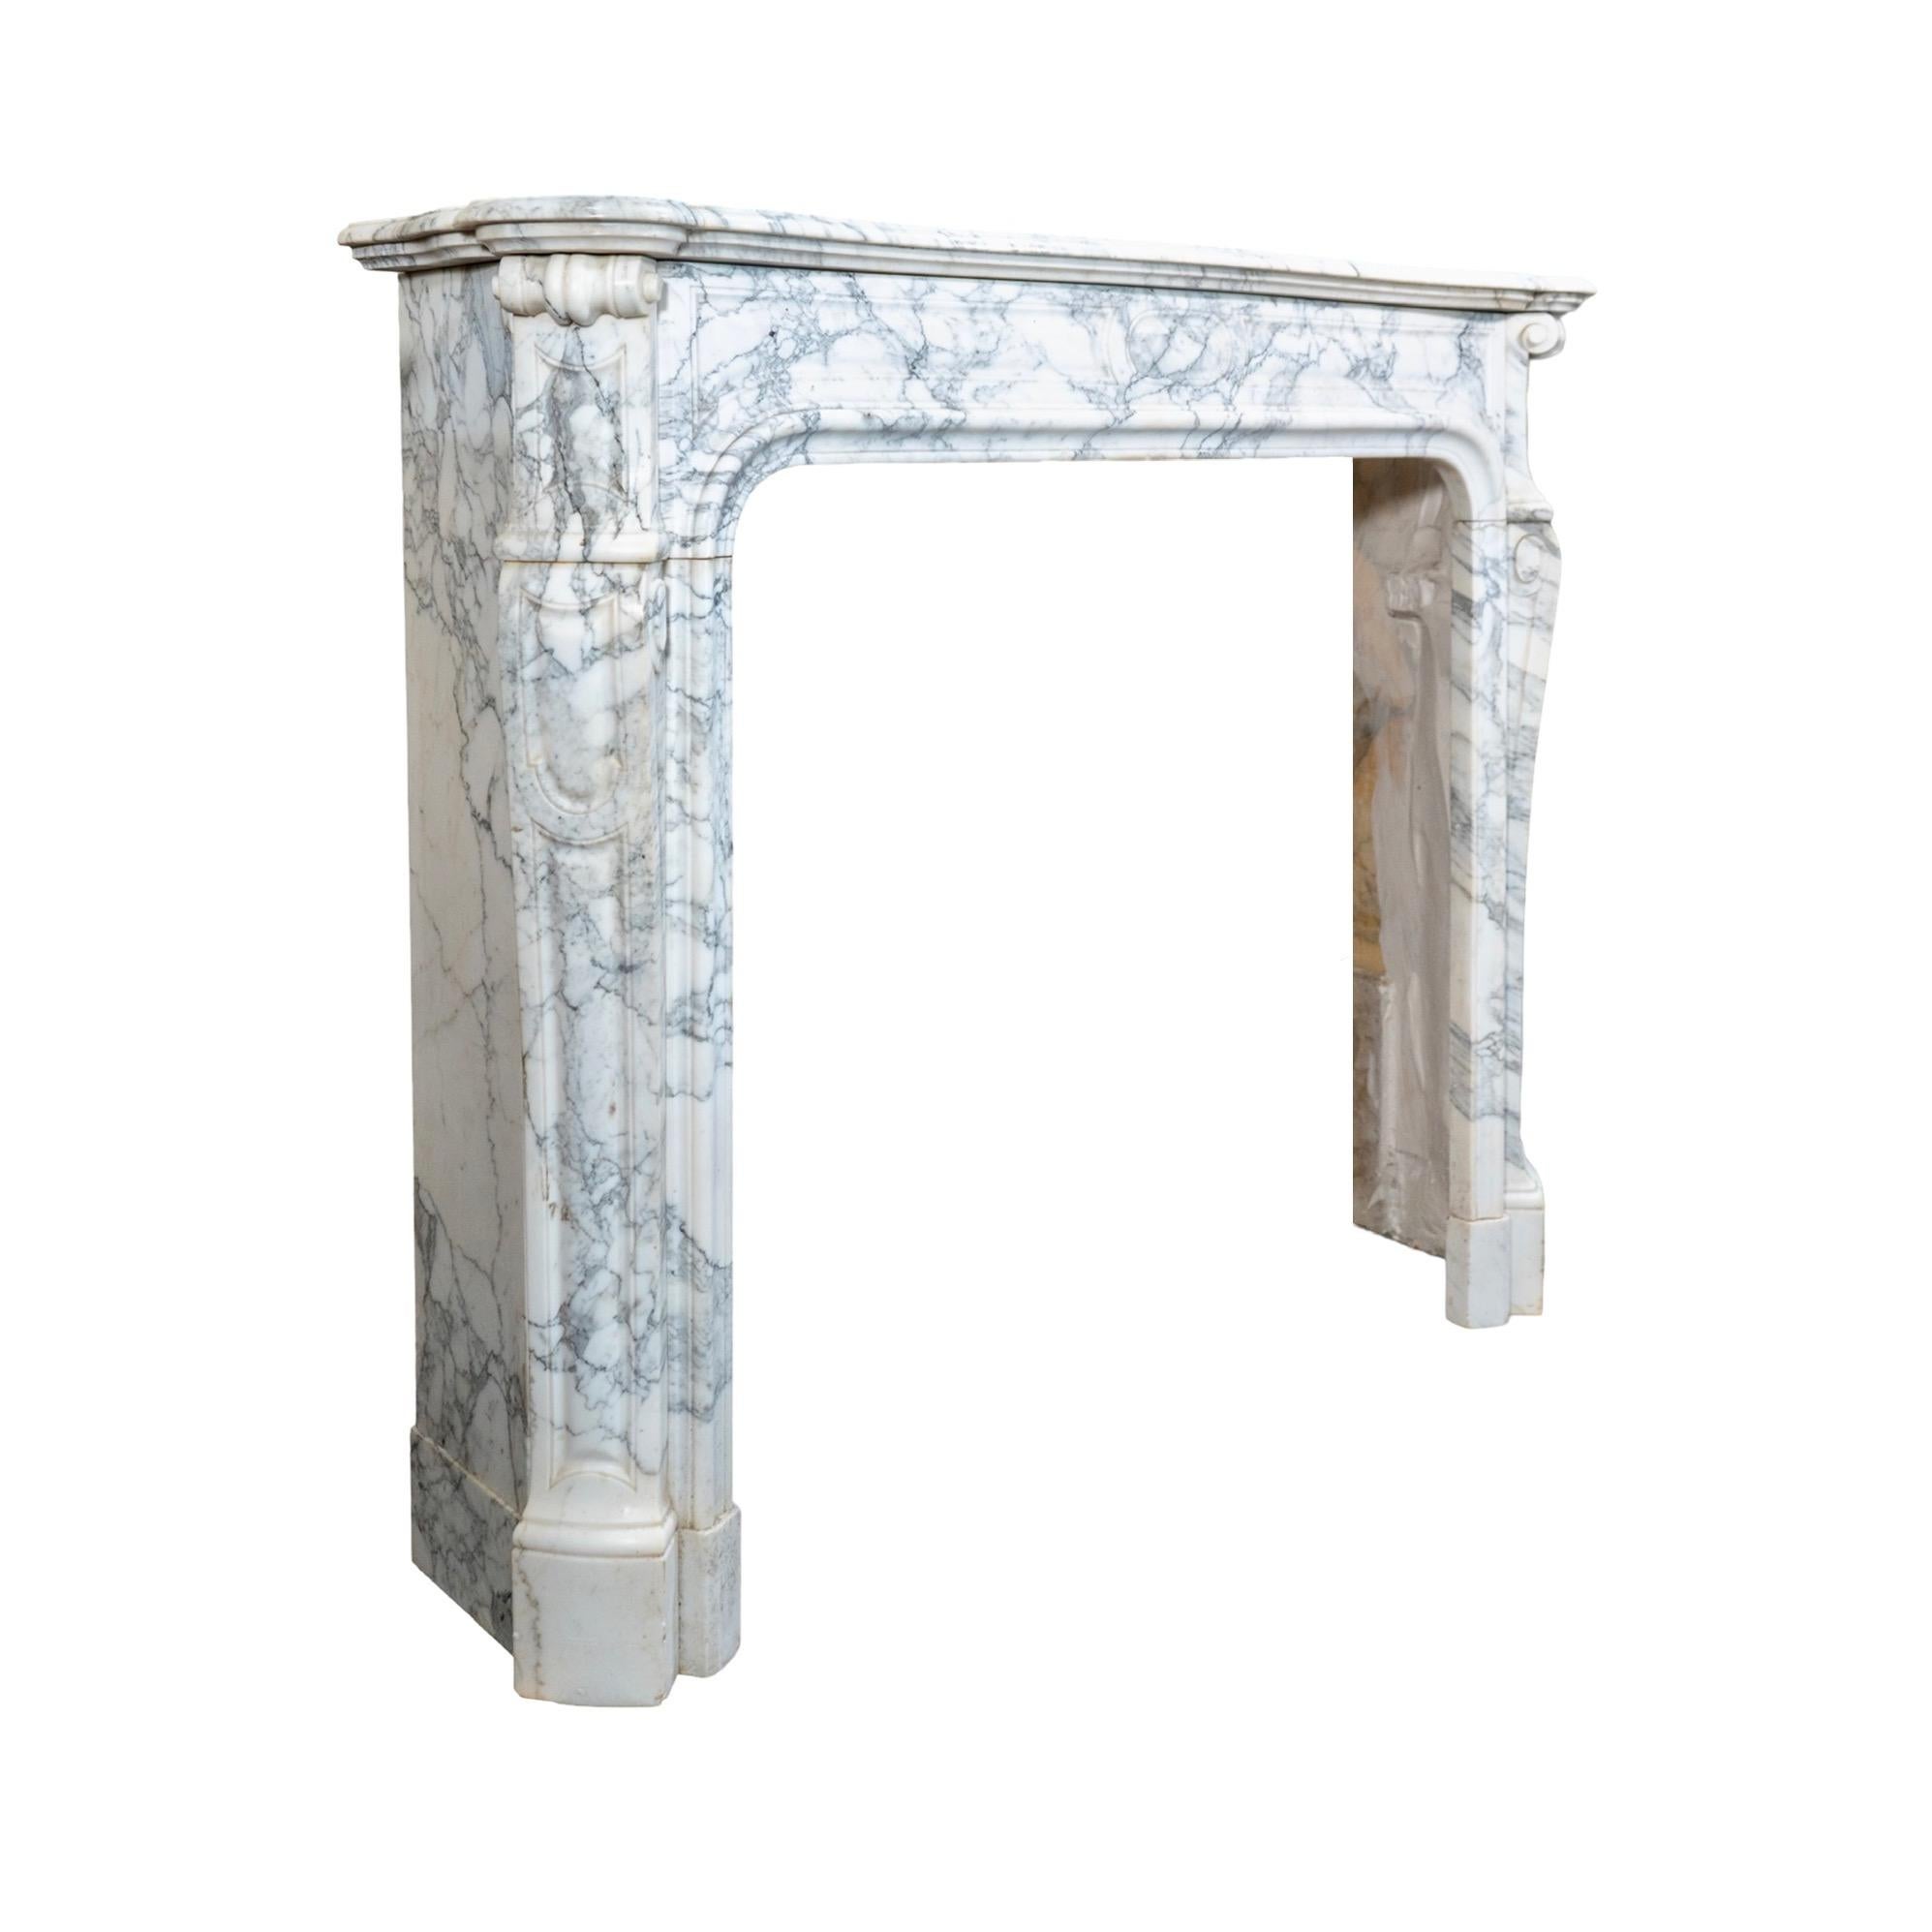 Late 19th Century French White Veined Carrara Marble Mantel For Sale